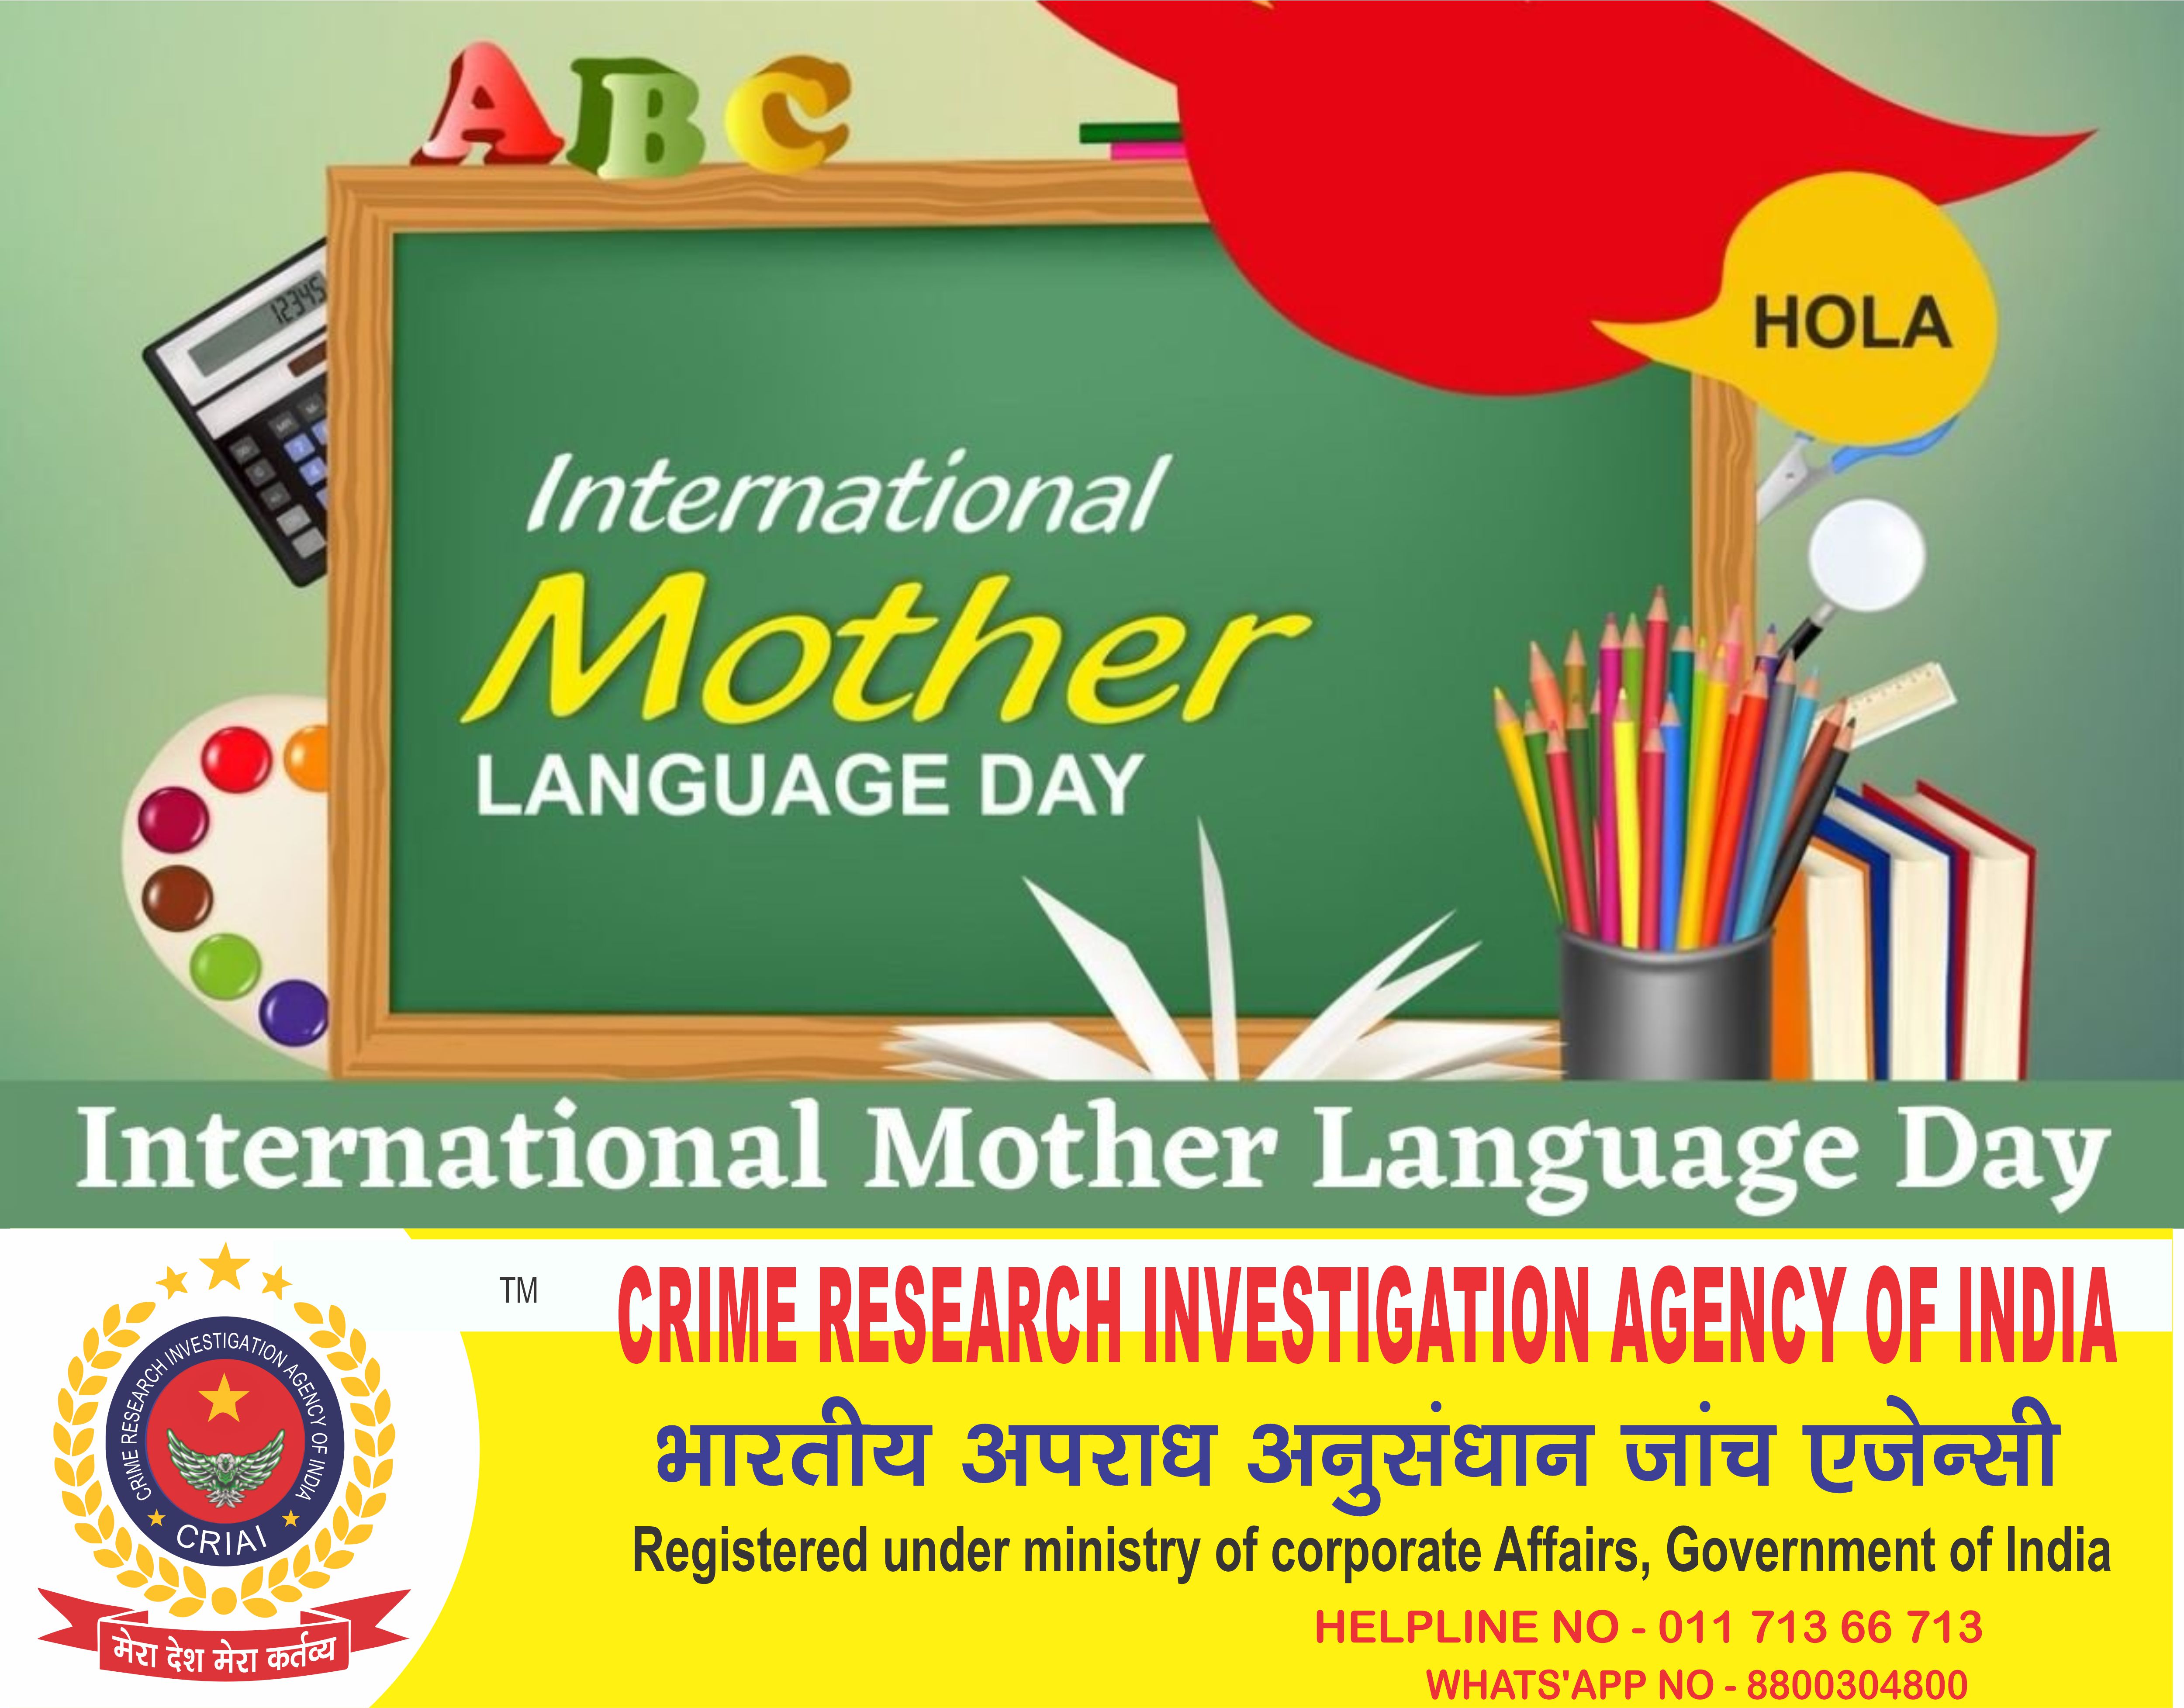 hindi-is-our-mother-tongue-hindi-is-very-dear-us-melodious-voice-hindi-we-love-every-moment-happy-international-mother-language-day